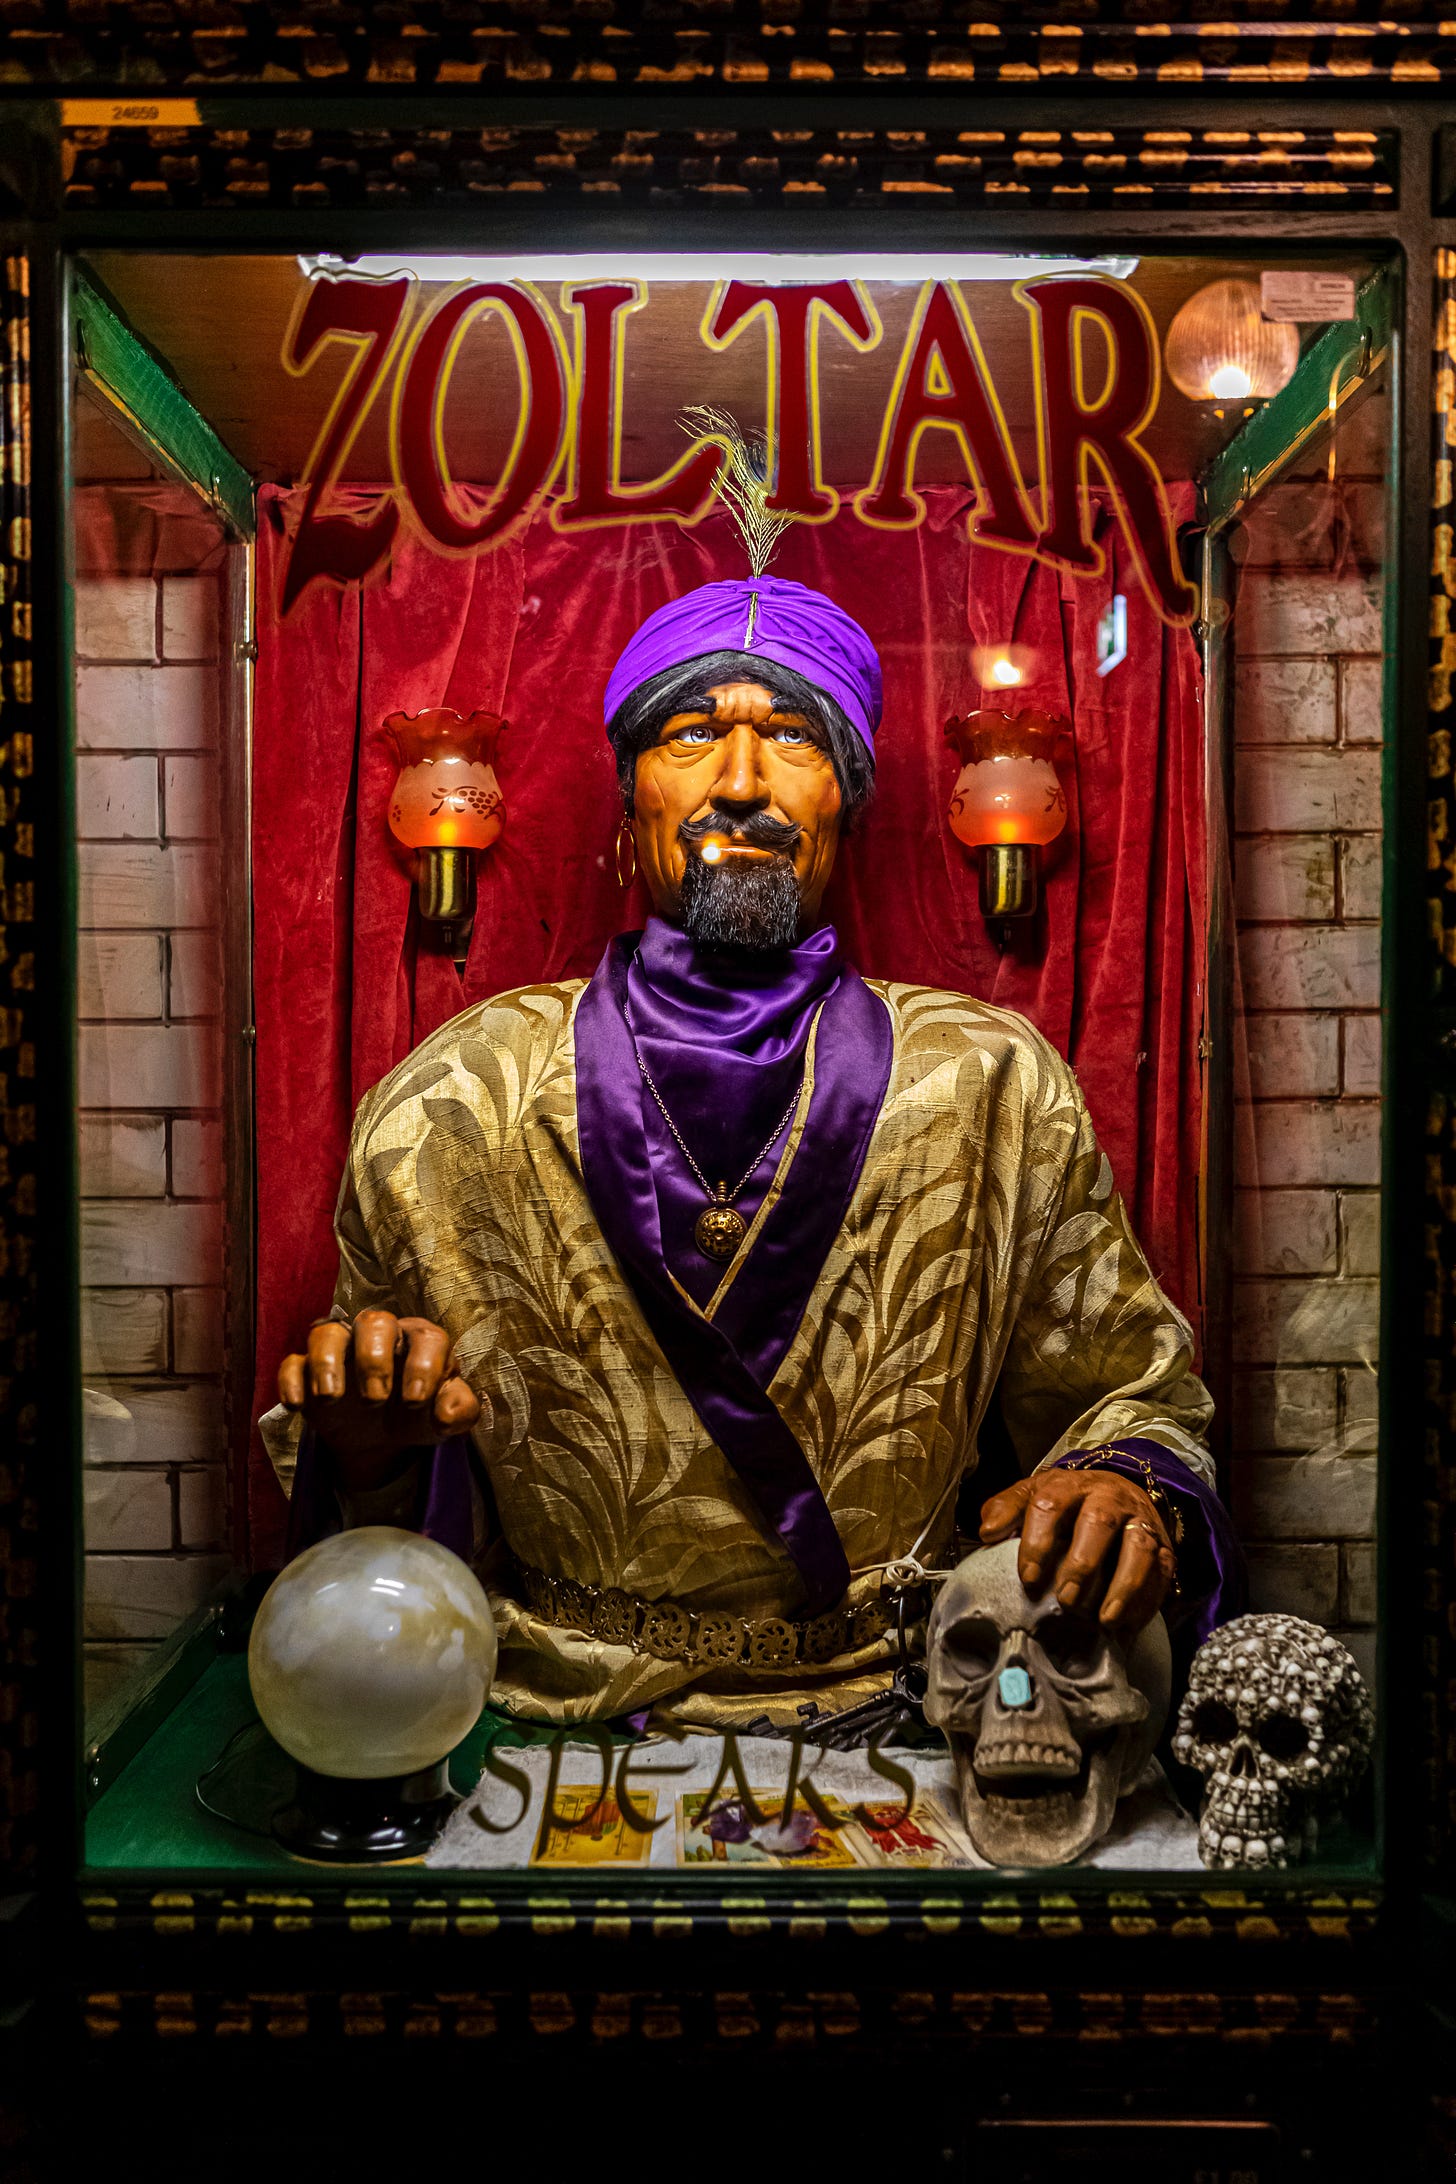 Image of the Zoltar fortune-telling booth with Zoltar's hand on a skull and crystal ball.